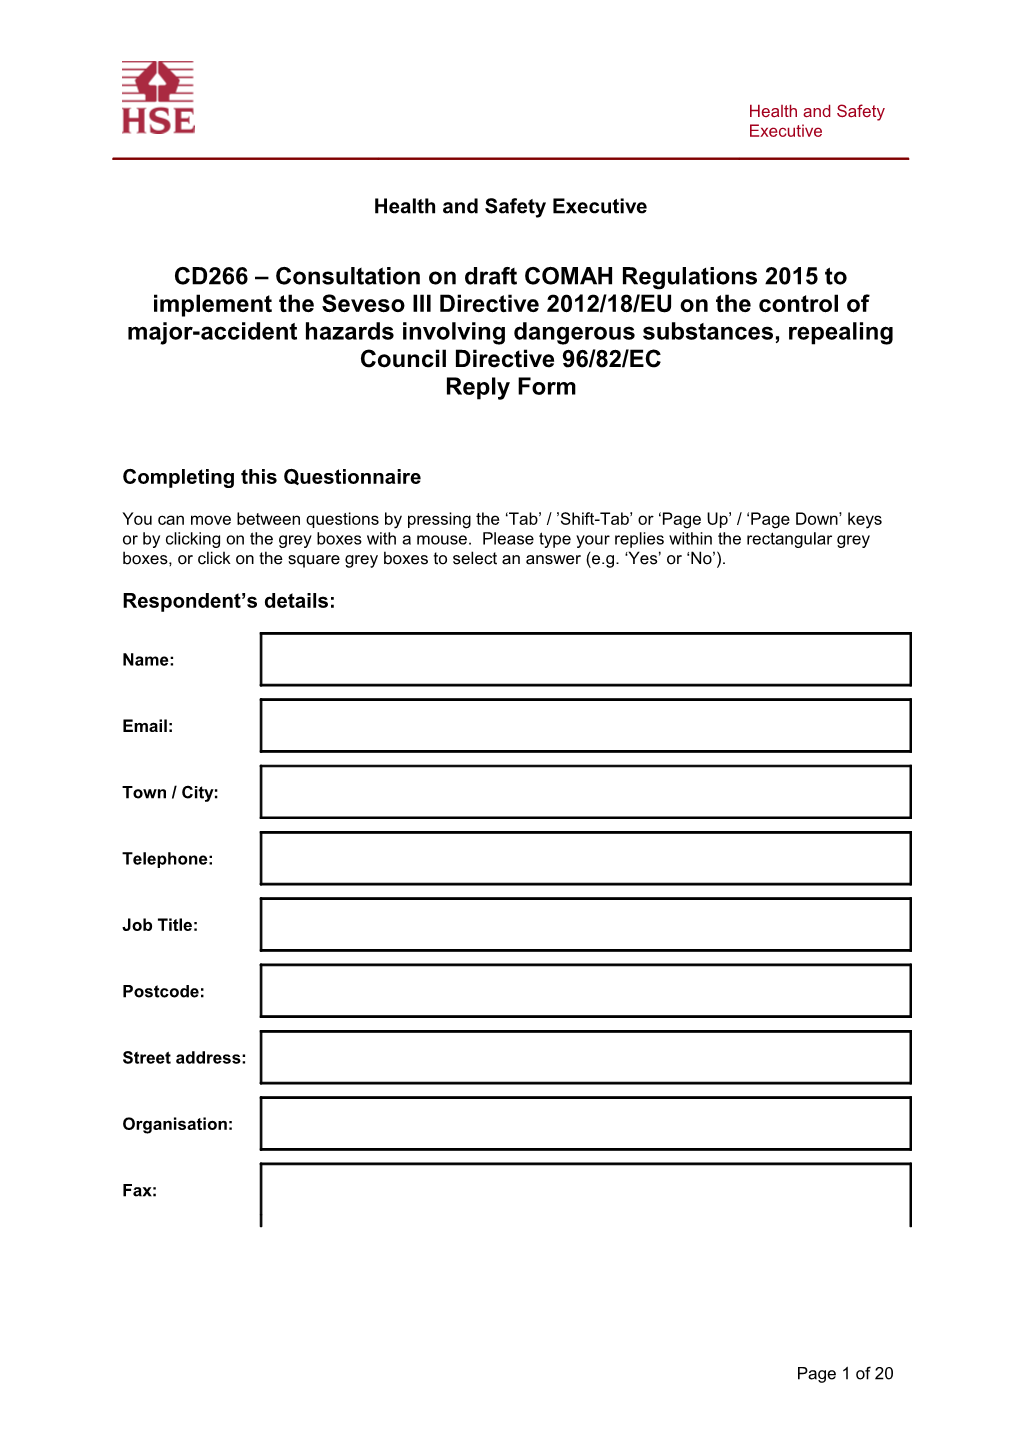 GHS Response Collection Template